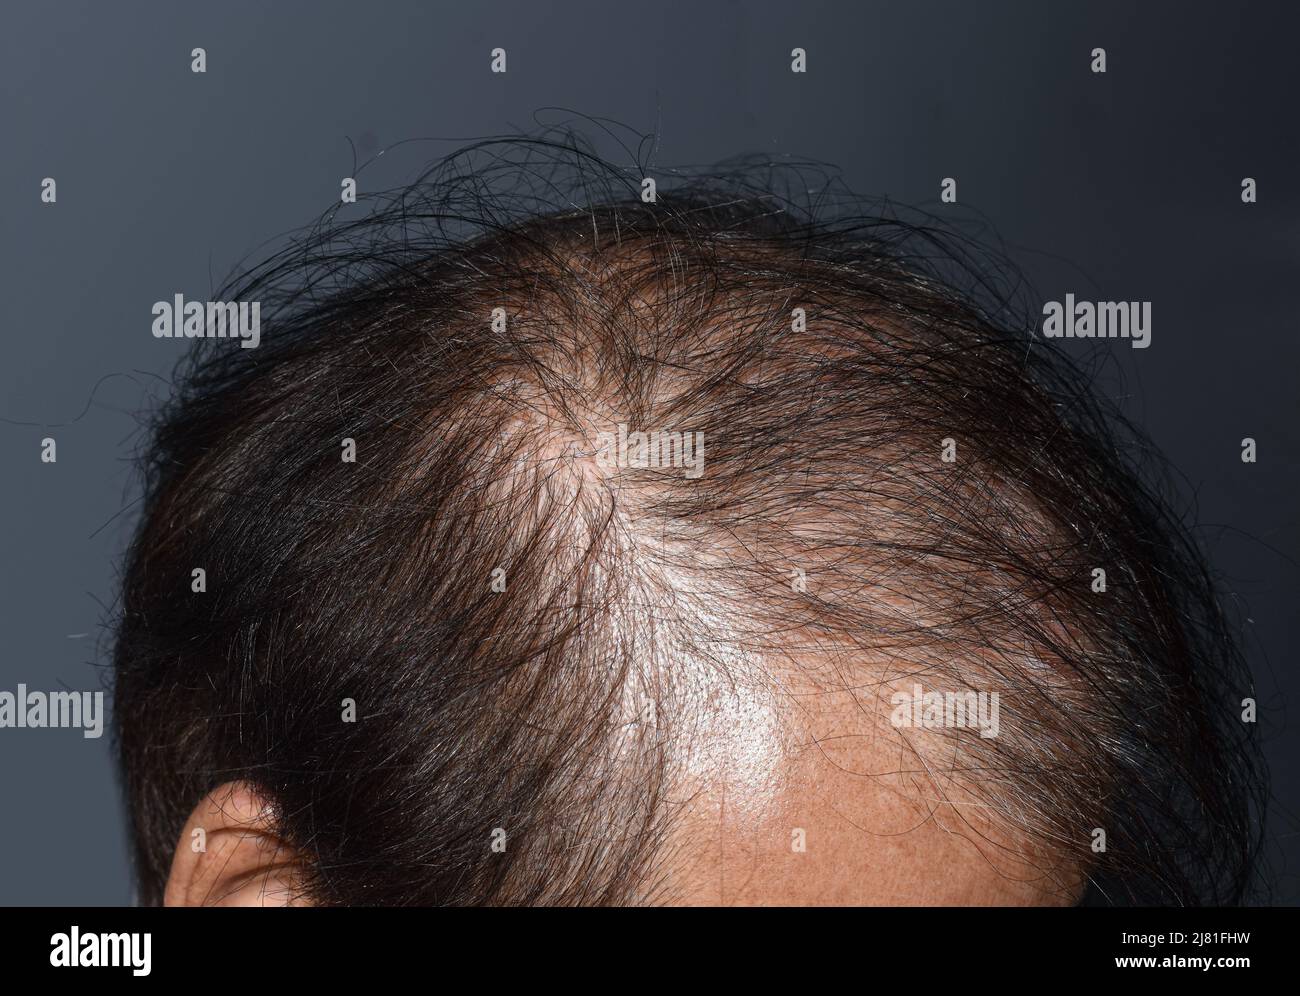 Thinning or sparse hair, male pattern hair loss in Southeast Asian, Chinese elder man. Stock Photo